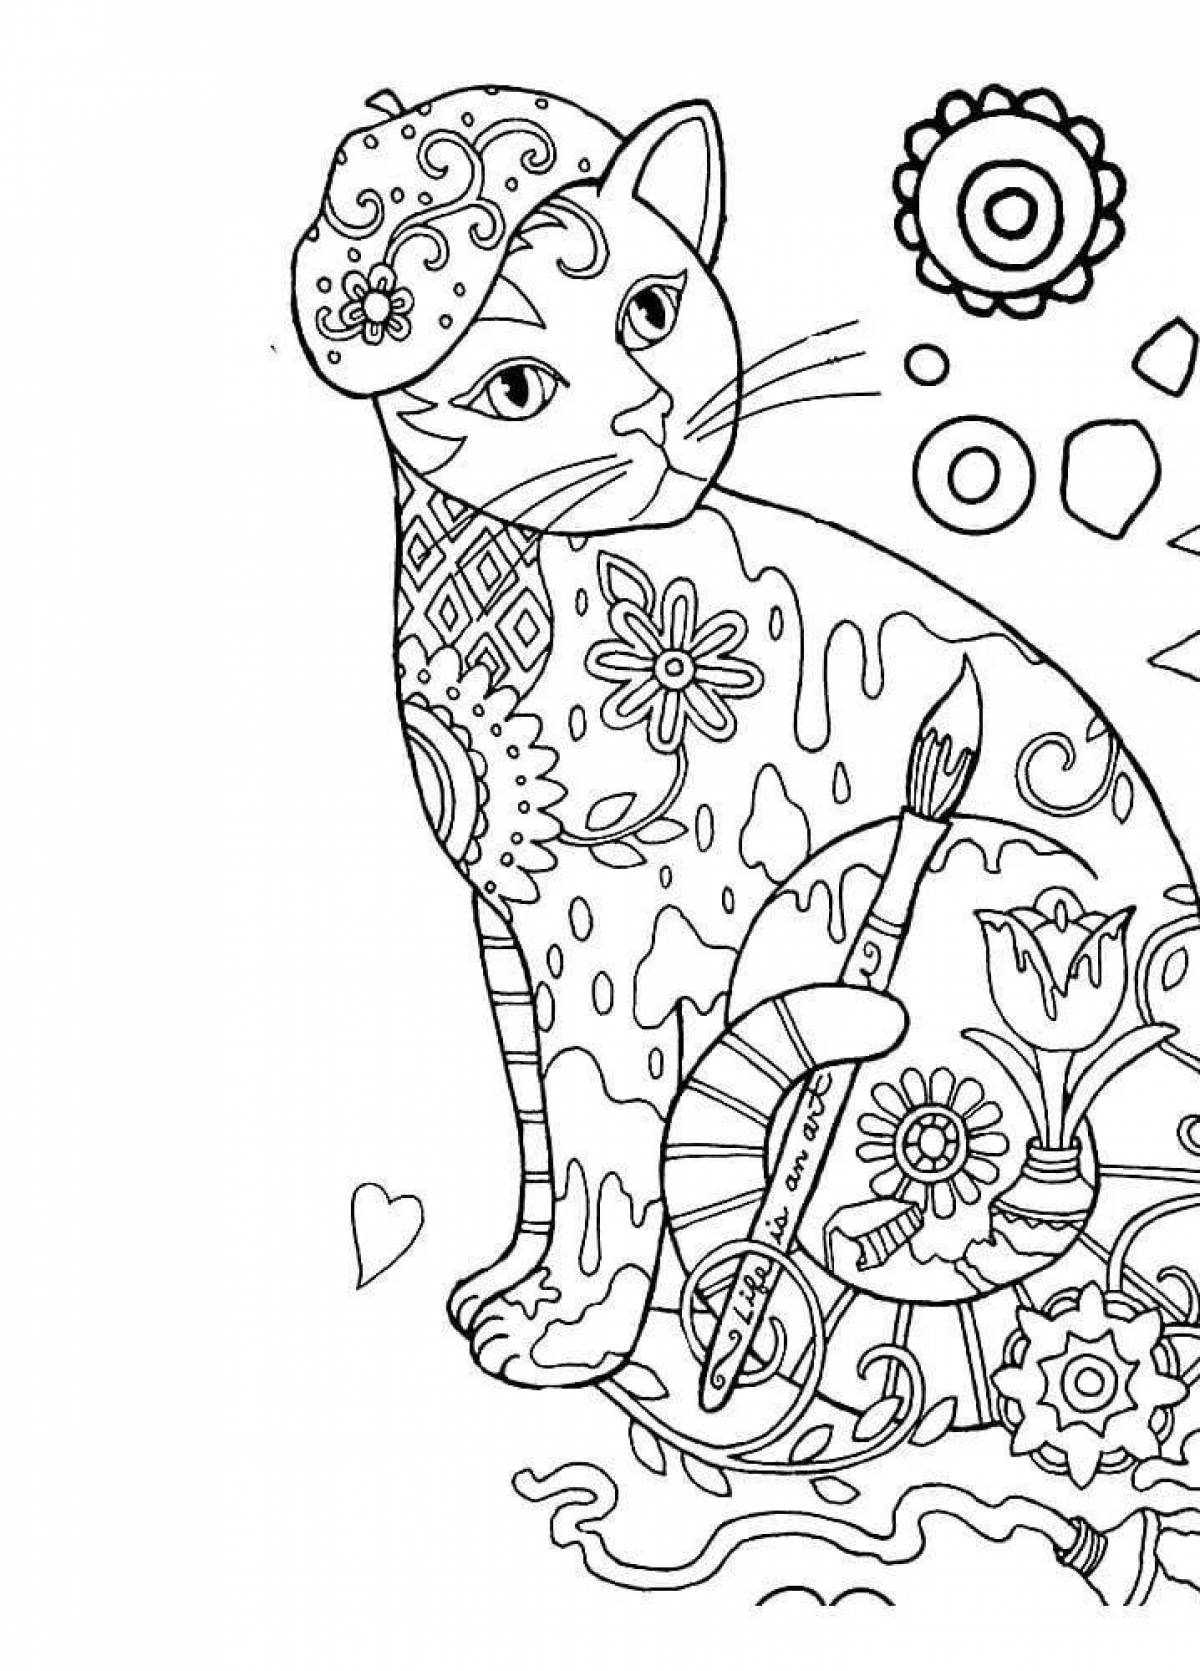 Coloring playful cat antistress therapy